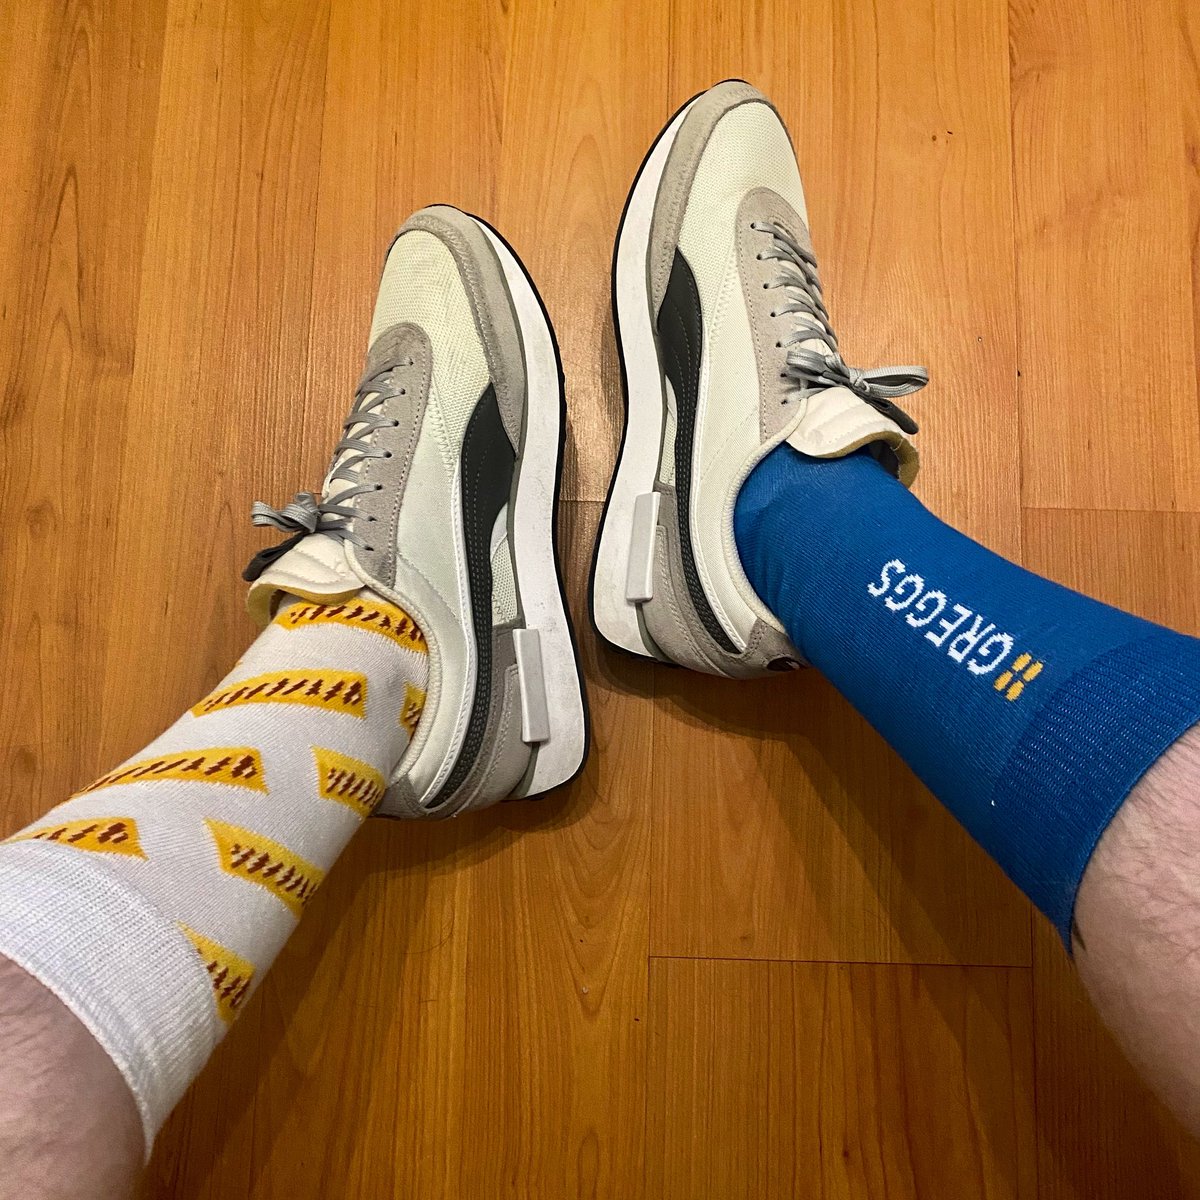 I’ve always got a piece of @GreggsOfficial with me now! 🧦😂 #GreggsandPrimark